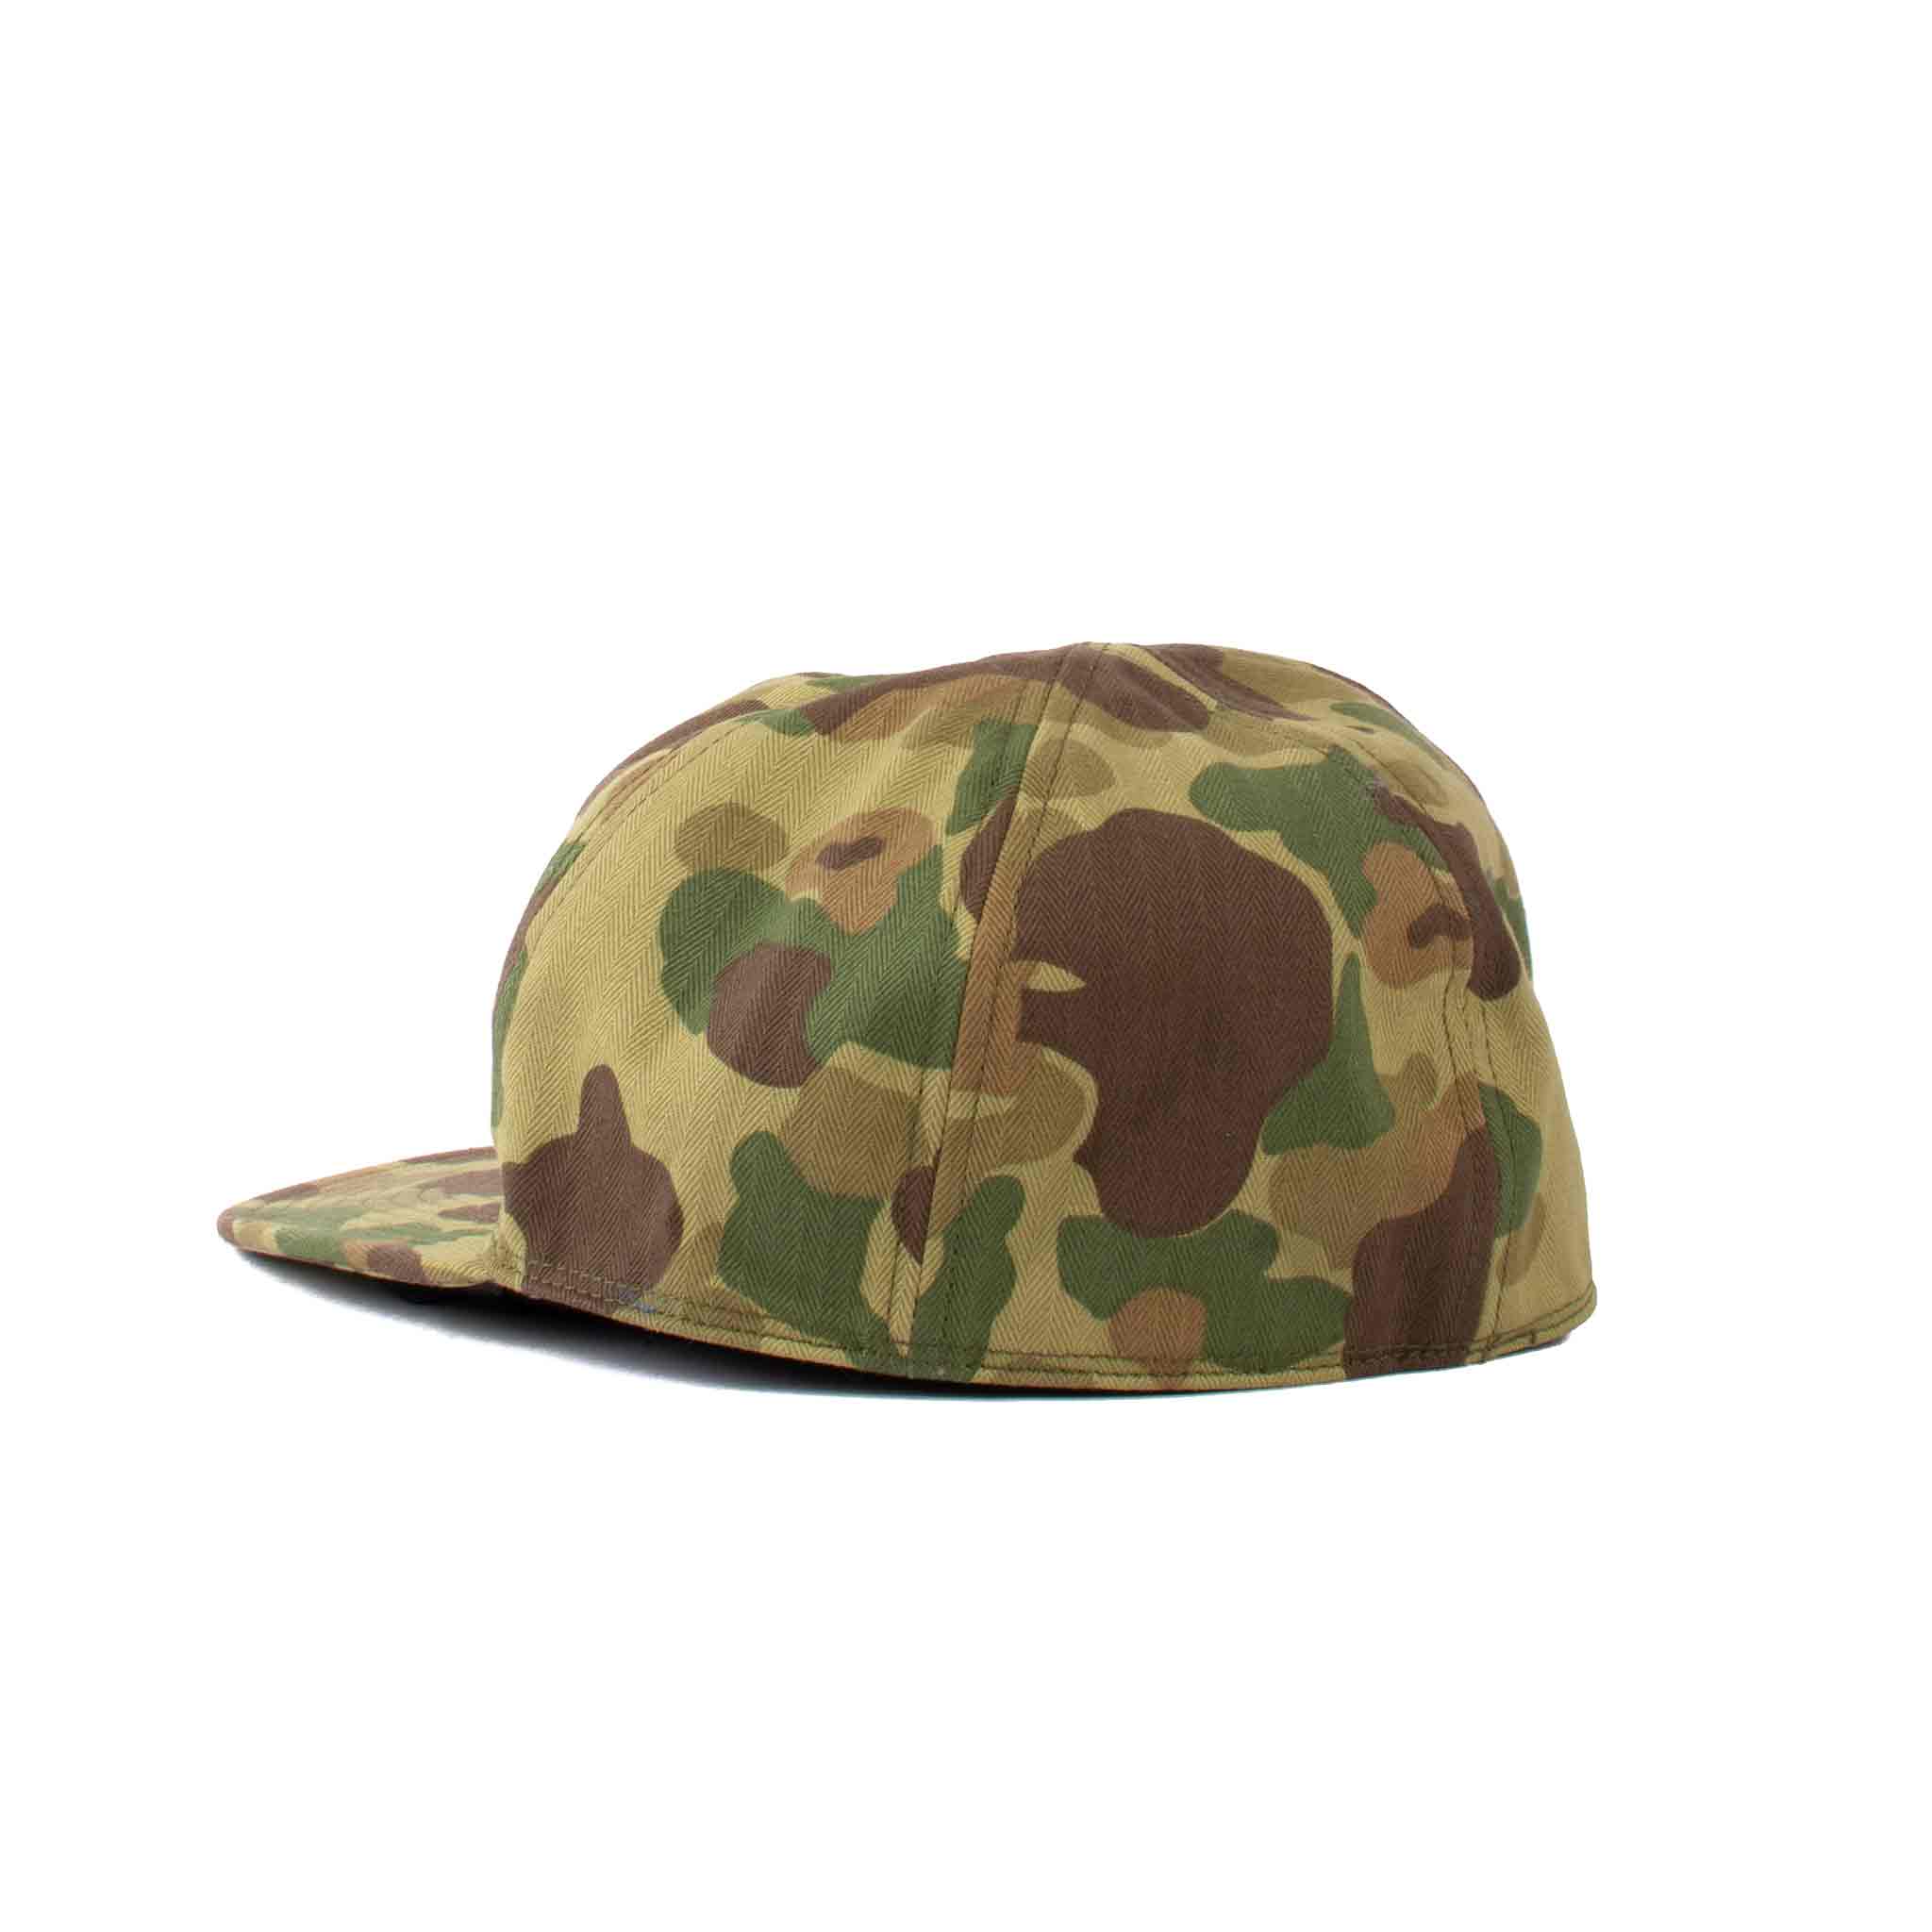 The Real McCoy's MA19004 Frogskin Mechanic Cap Green Back